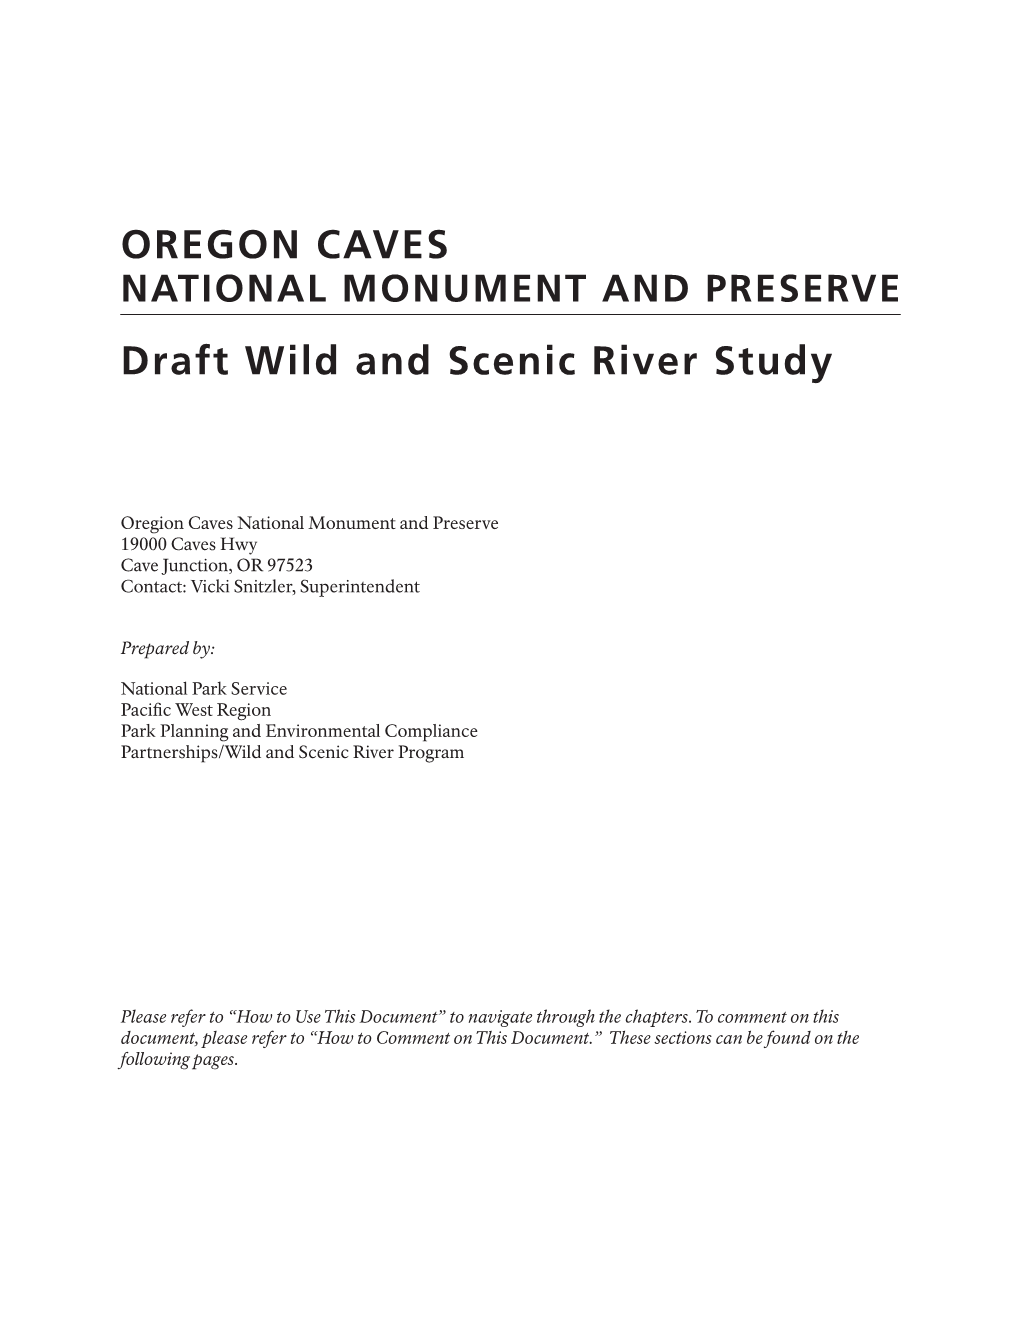 OREGON CAVES NATIONAL MONUMENT and PRESERVE Draft Wild and Scenic River Study